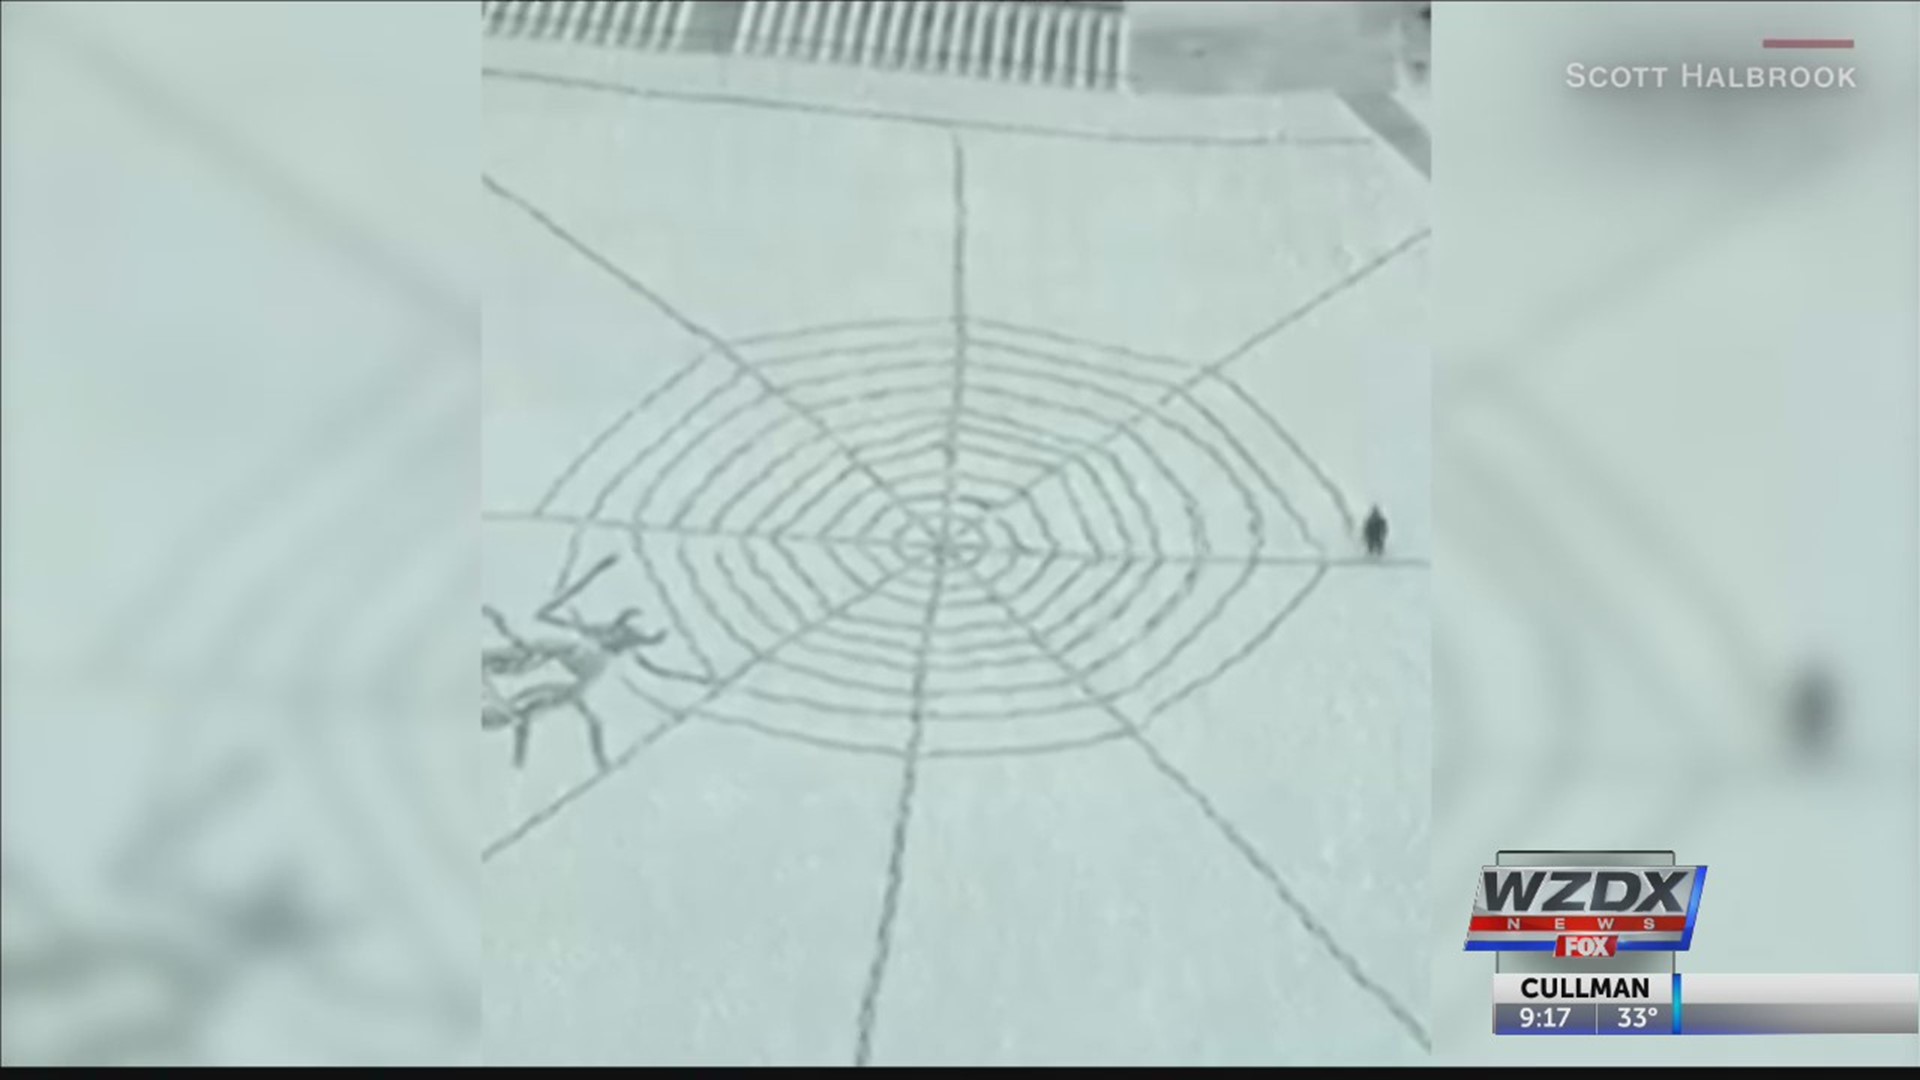 A mystery artist used fresh snow in Cleveland, Ohio, to make a creative statement. Scott Halbrook spotted this snowy spiderweb being spun from his hotel room window.